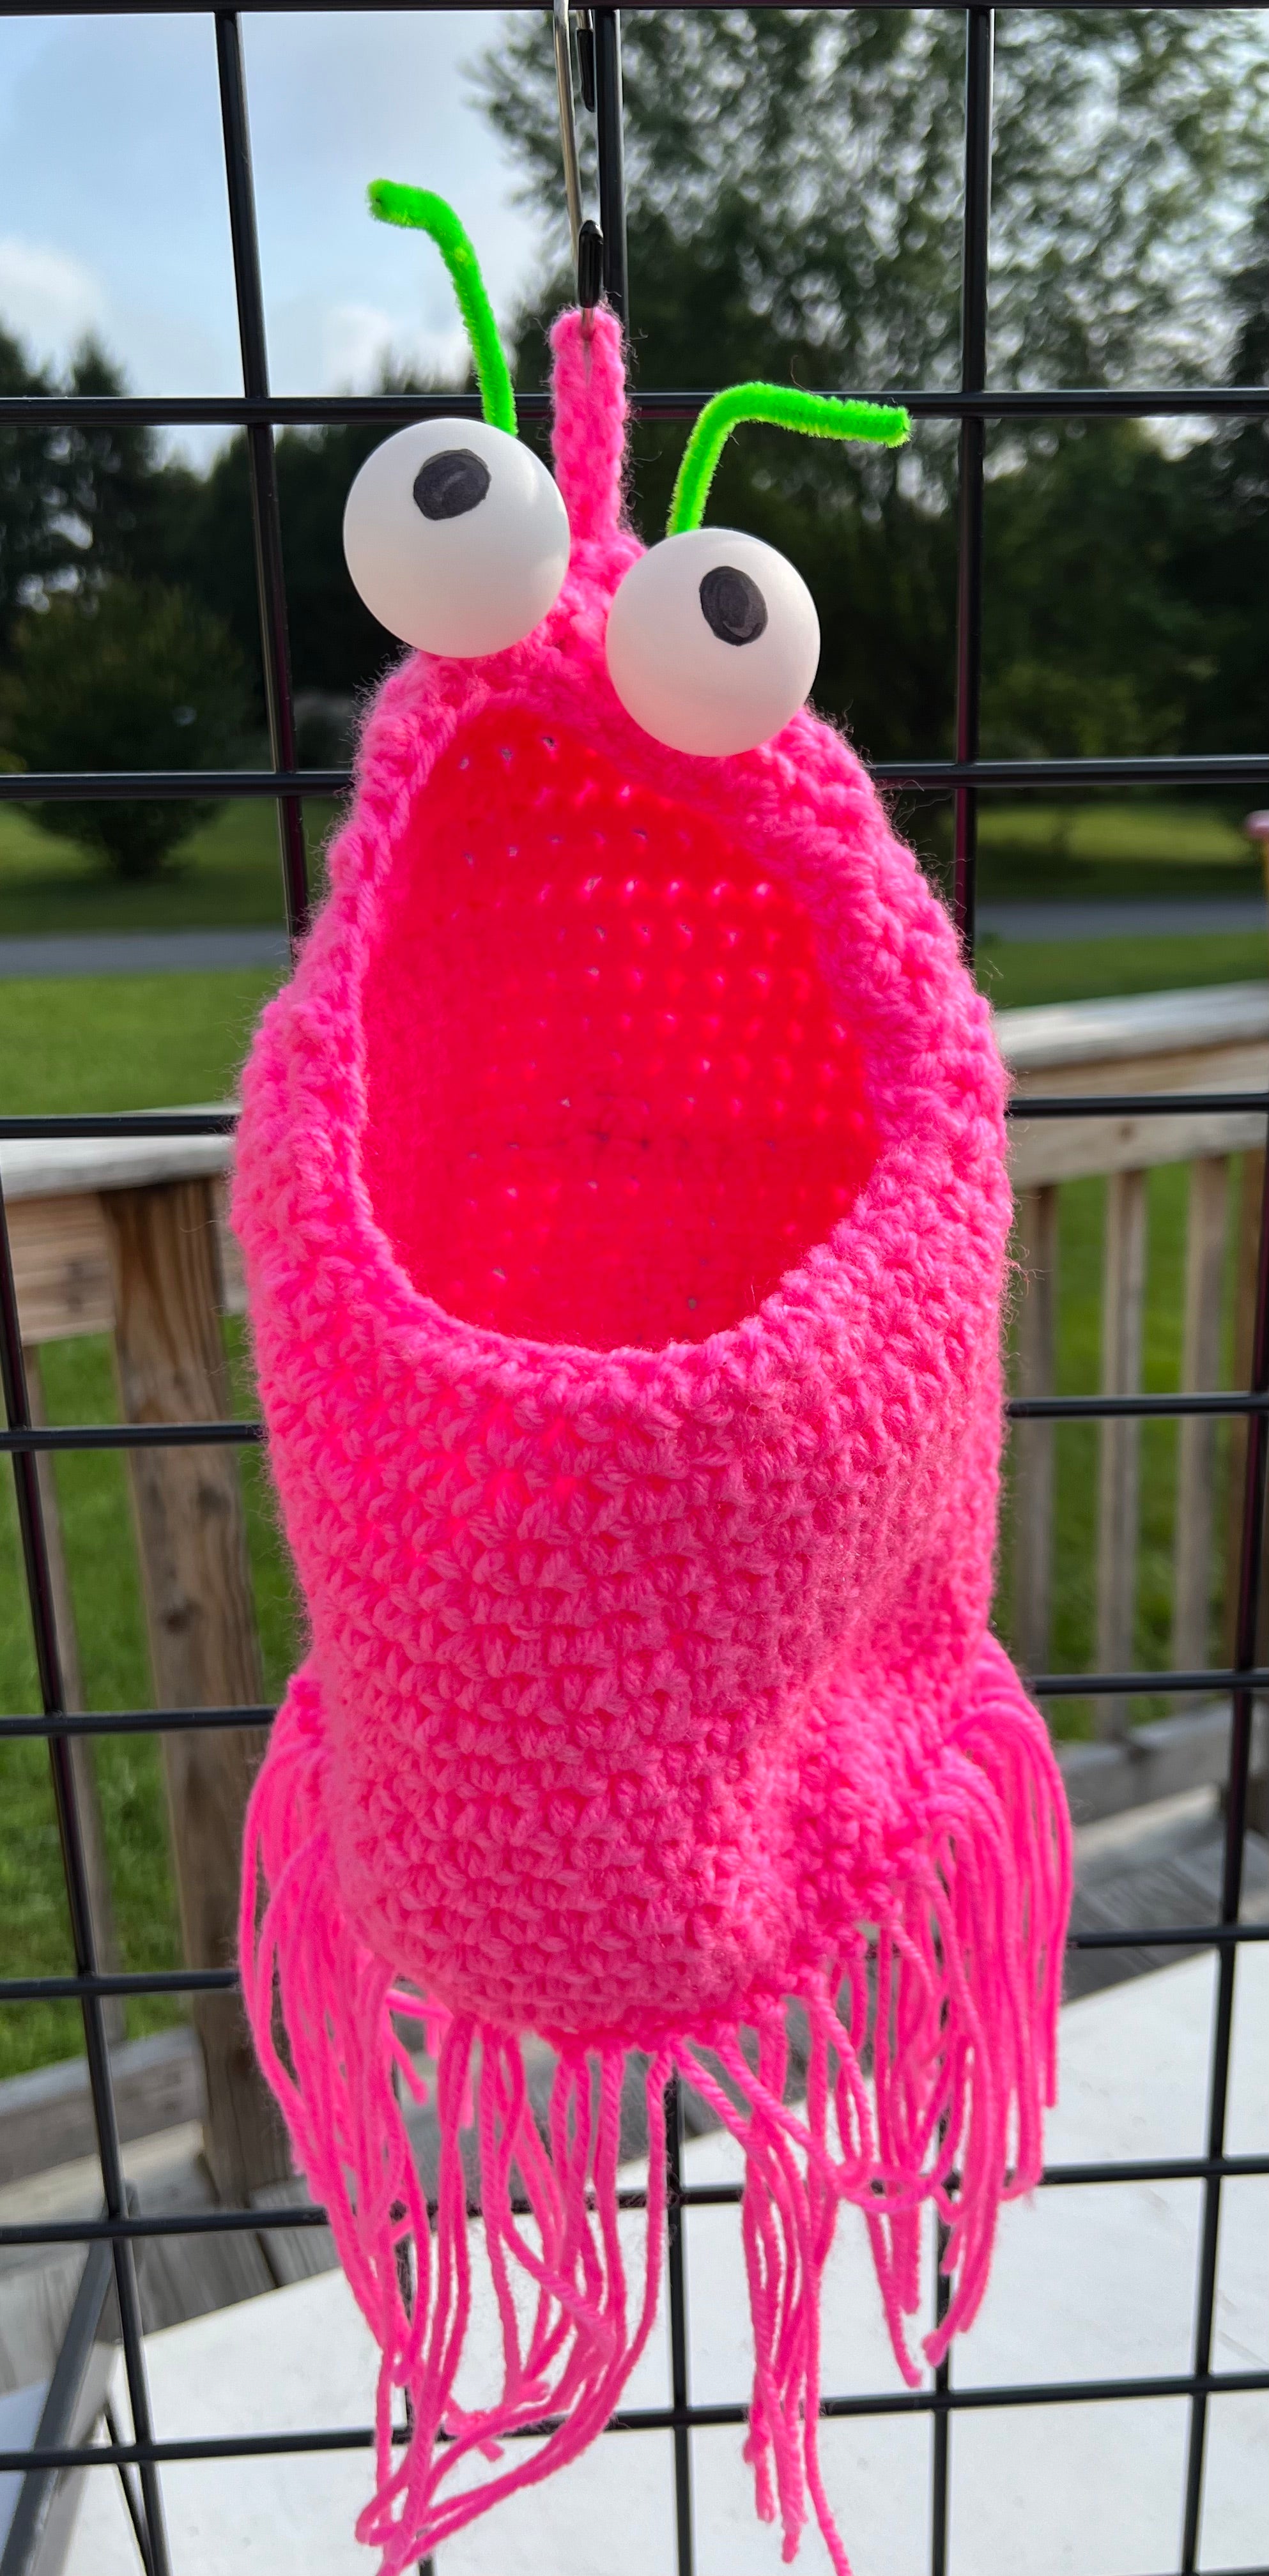 Yip Yips - hanging basket - alien monsters - toy catcher - plant holder